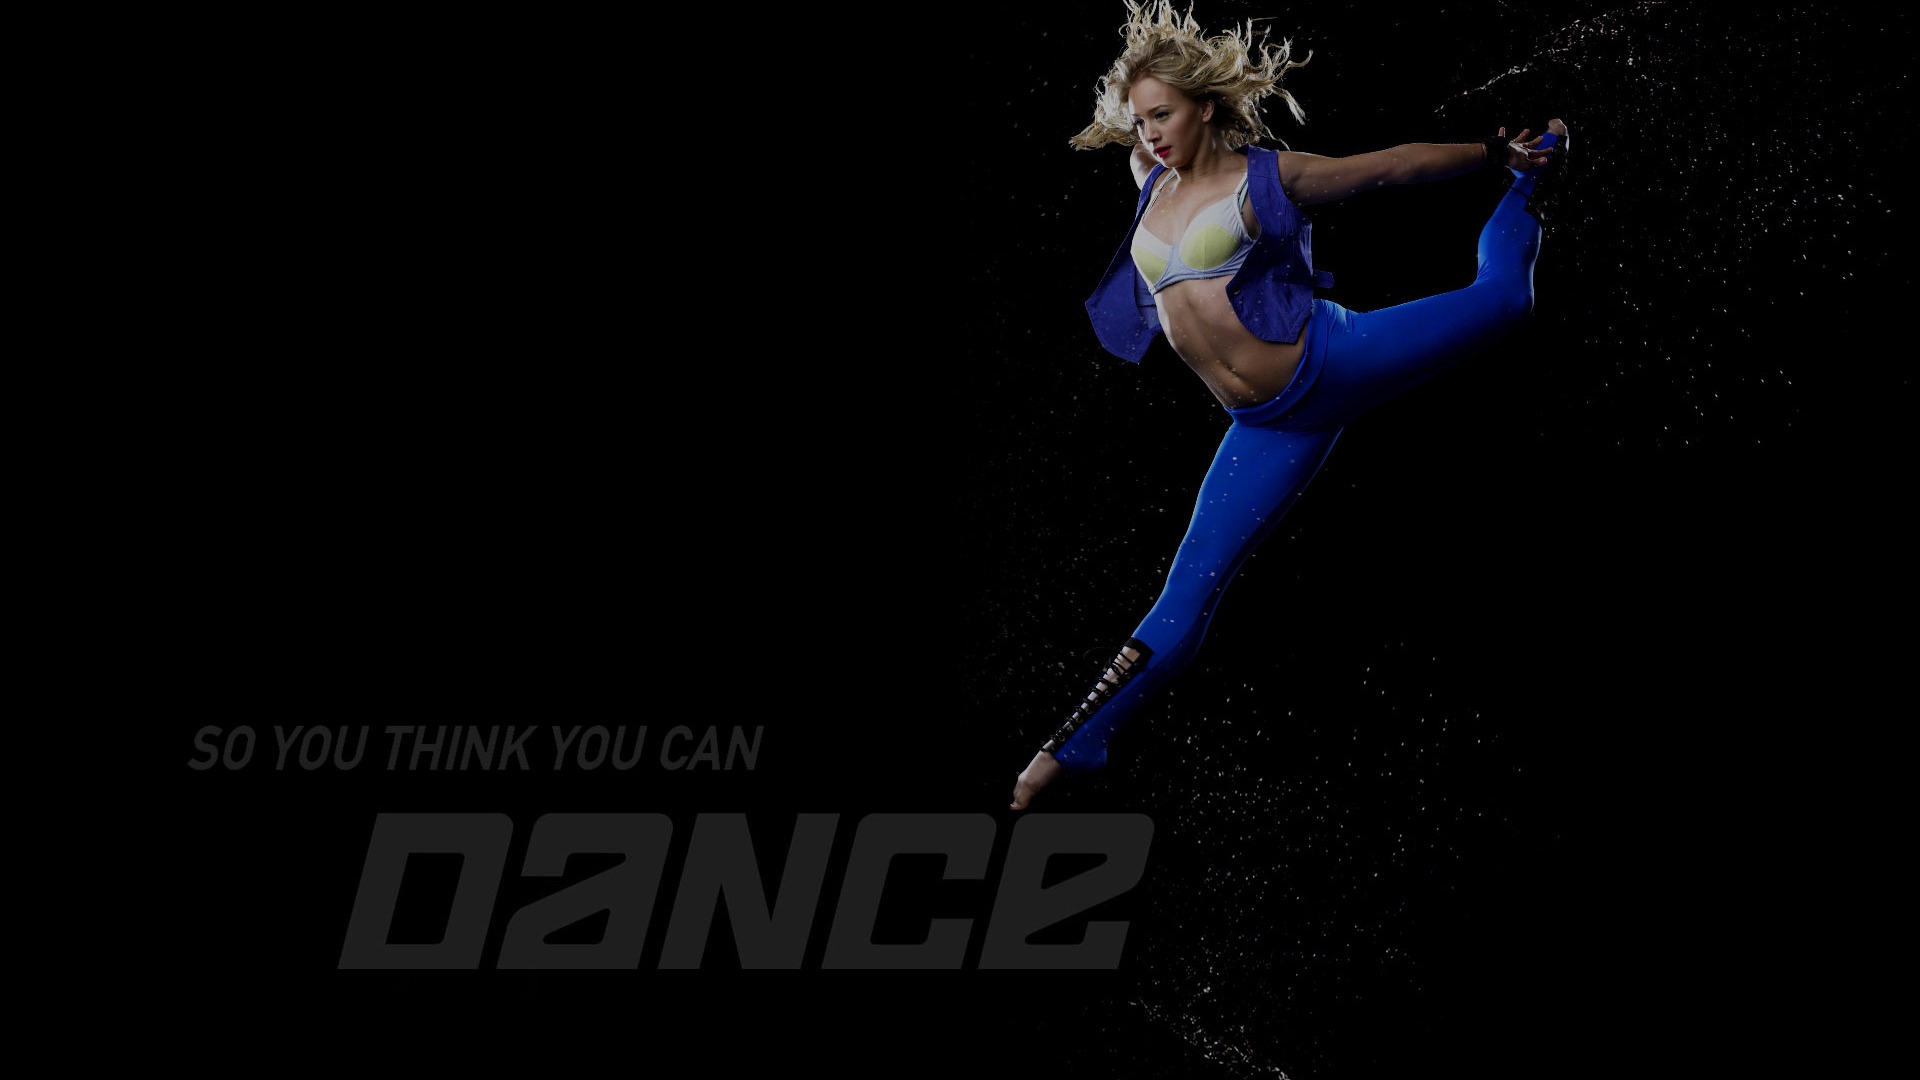 So You Think You Can Dance wallpaper (2) #19 - 1920x1080